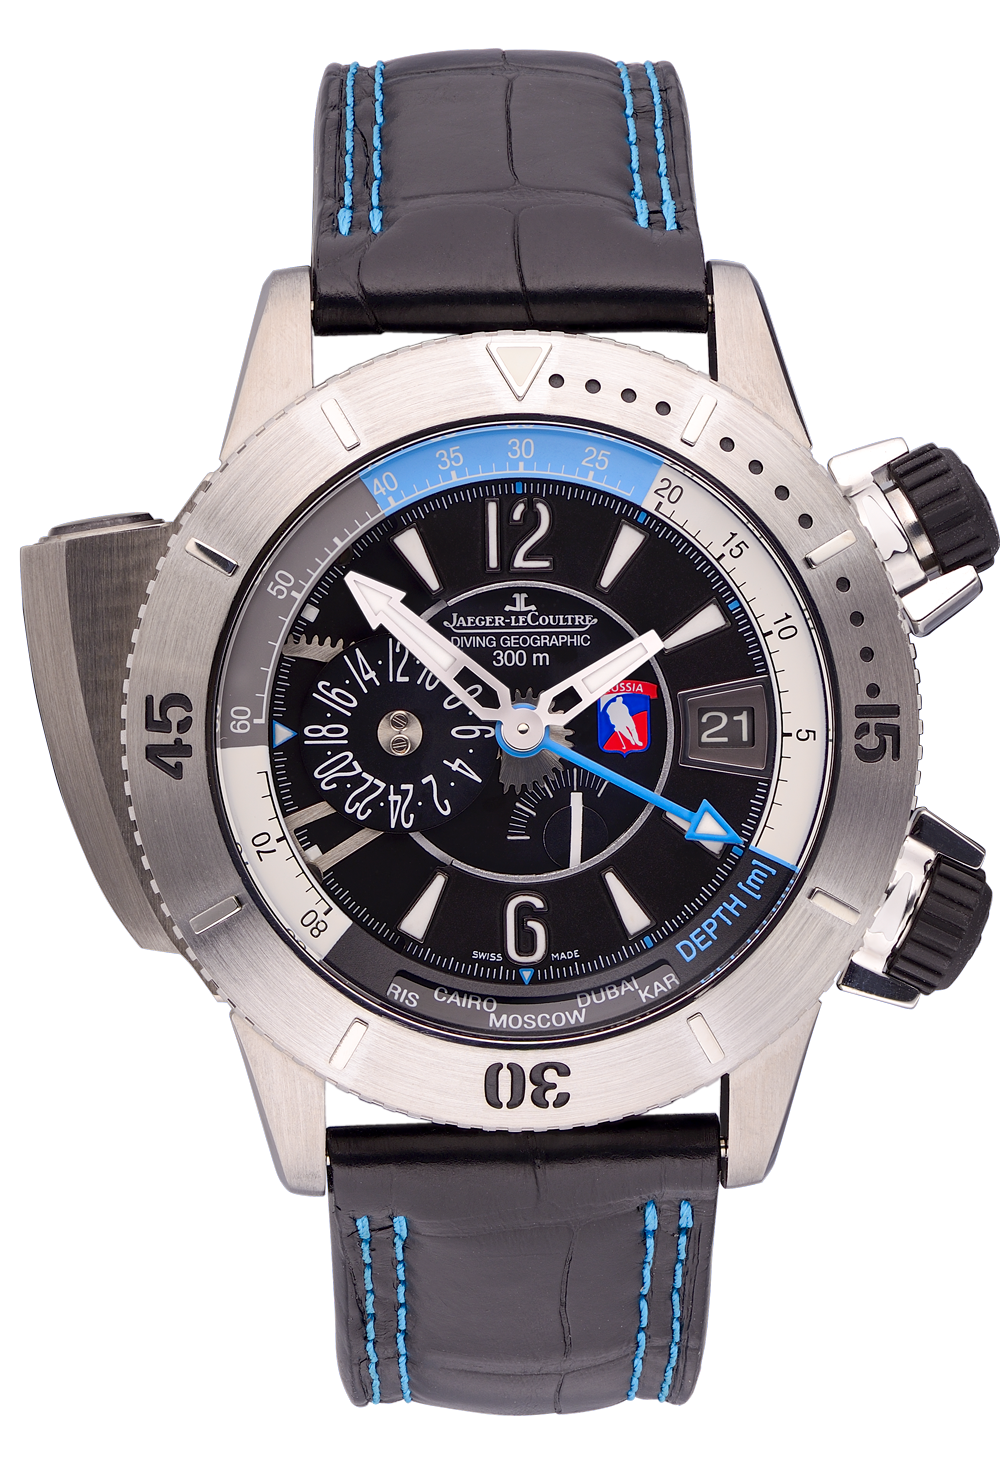 Jaeger-LeCoultre Master Compressor Diving Pro Geographic 44 mm 159.T.3 159.T.3